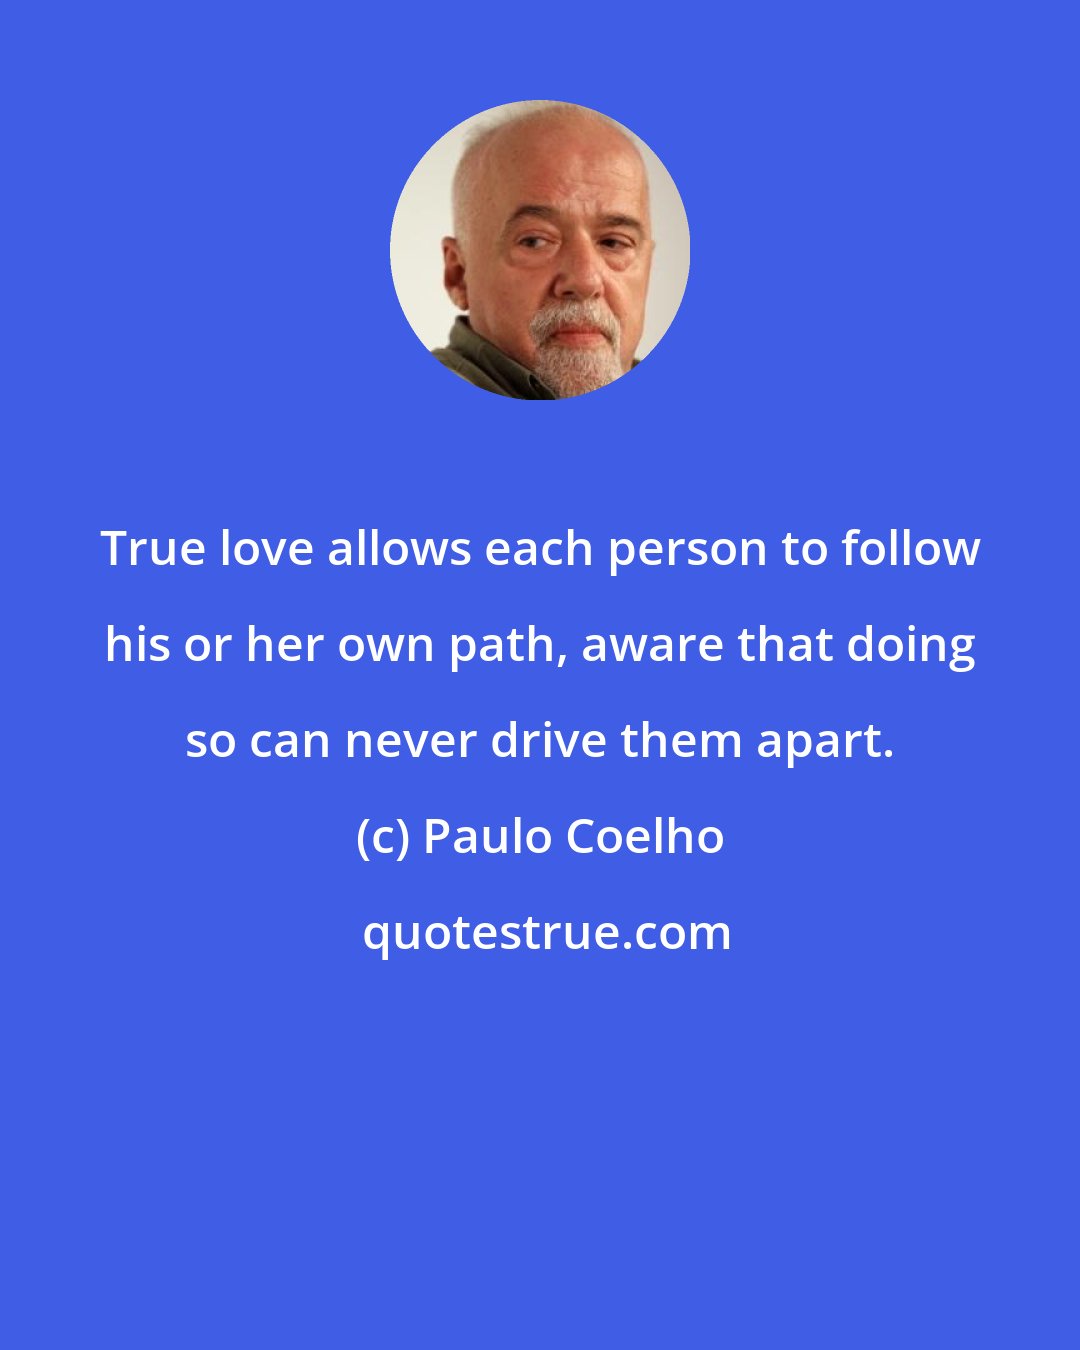 Paulo Coelho: True love allows each person to follow his or her own path, aware that doing so can never drive them apart.